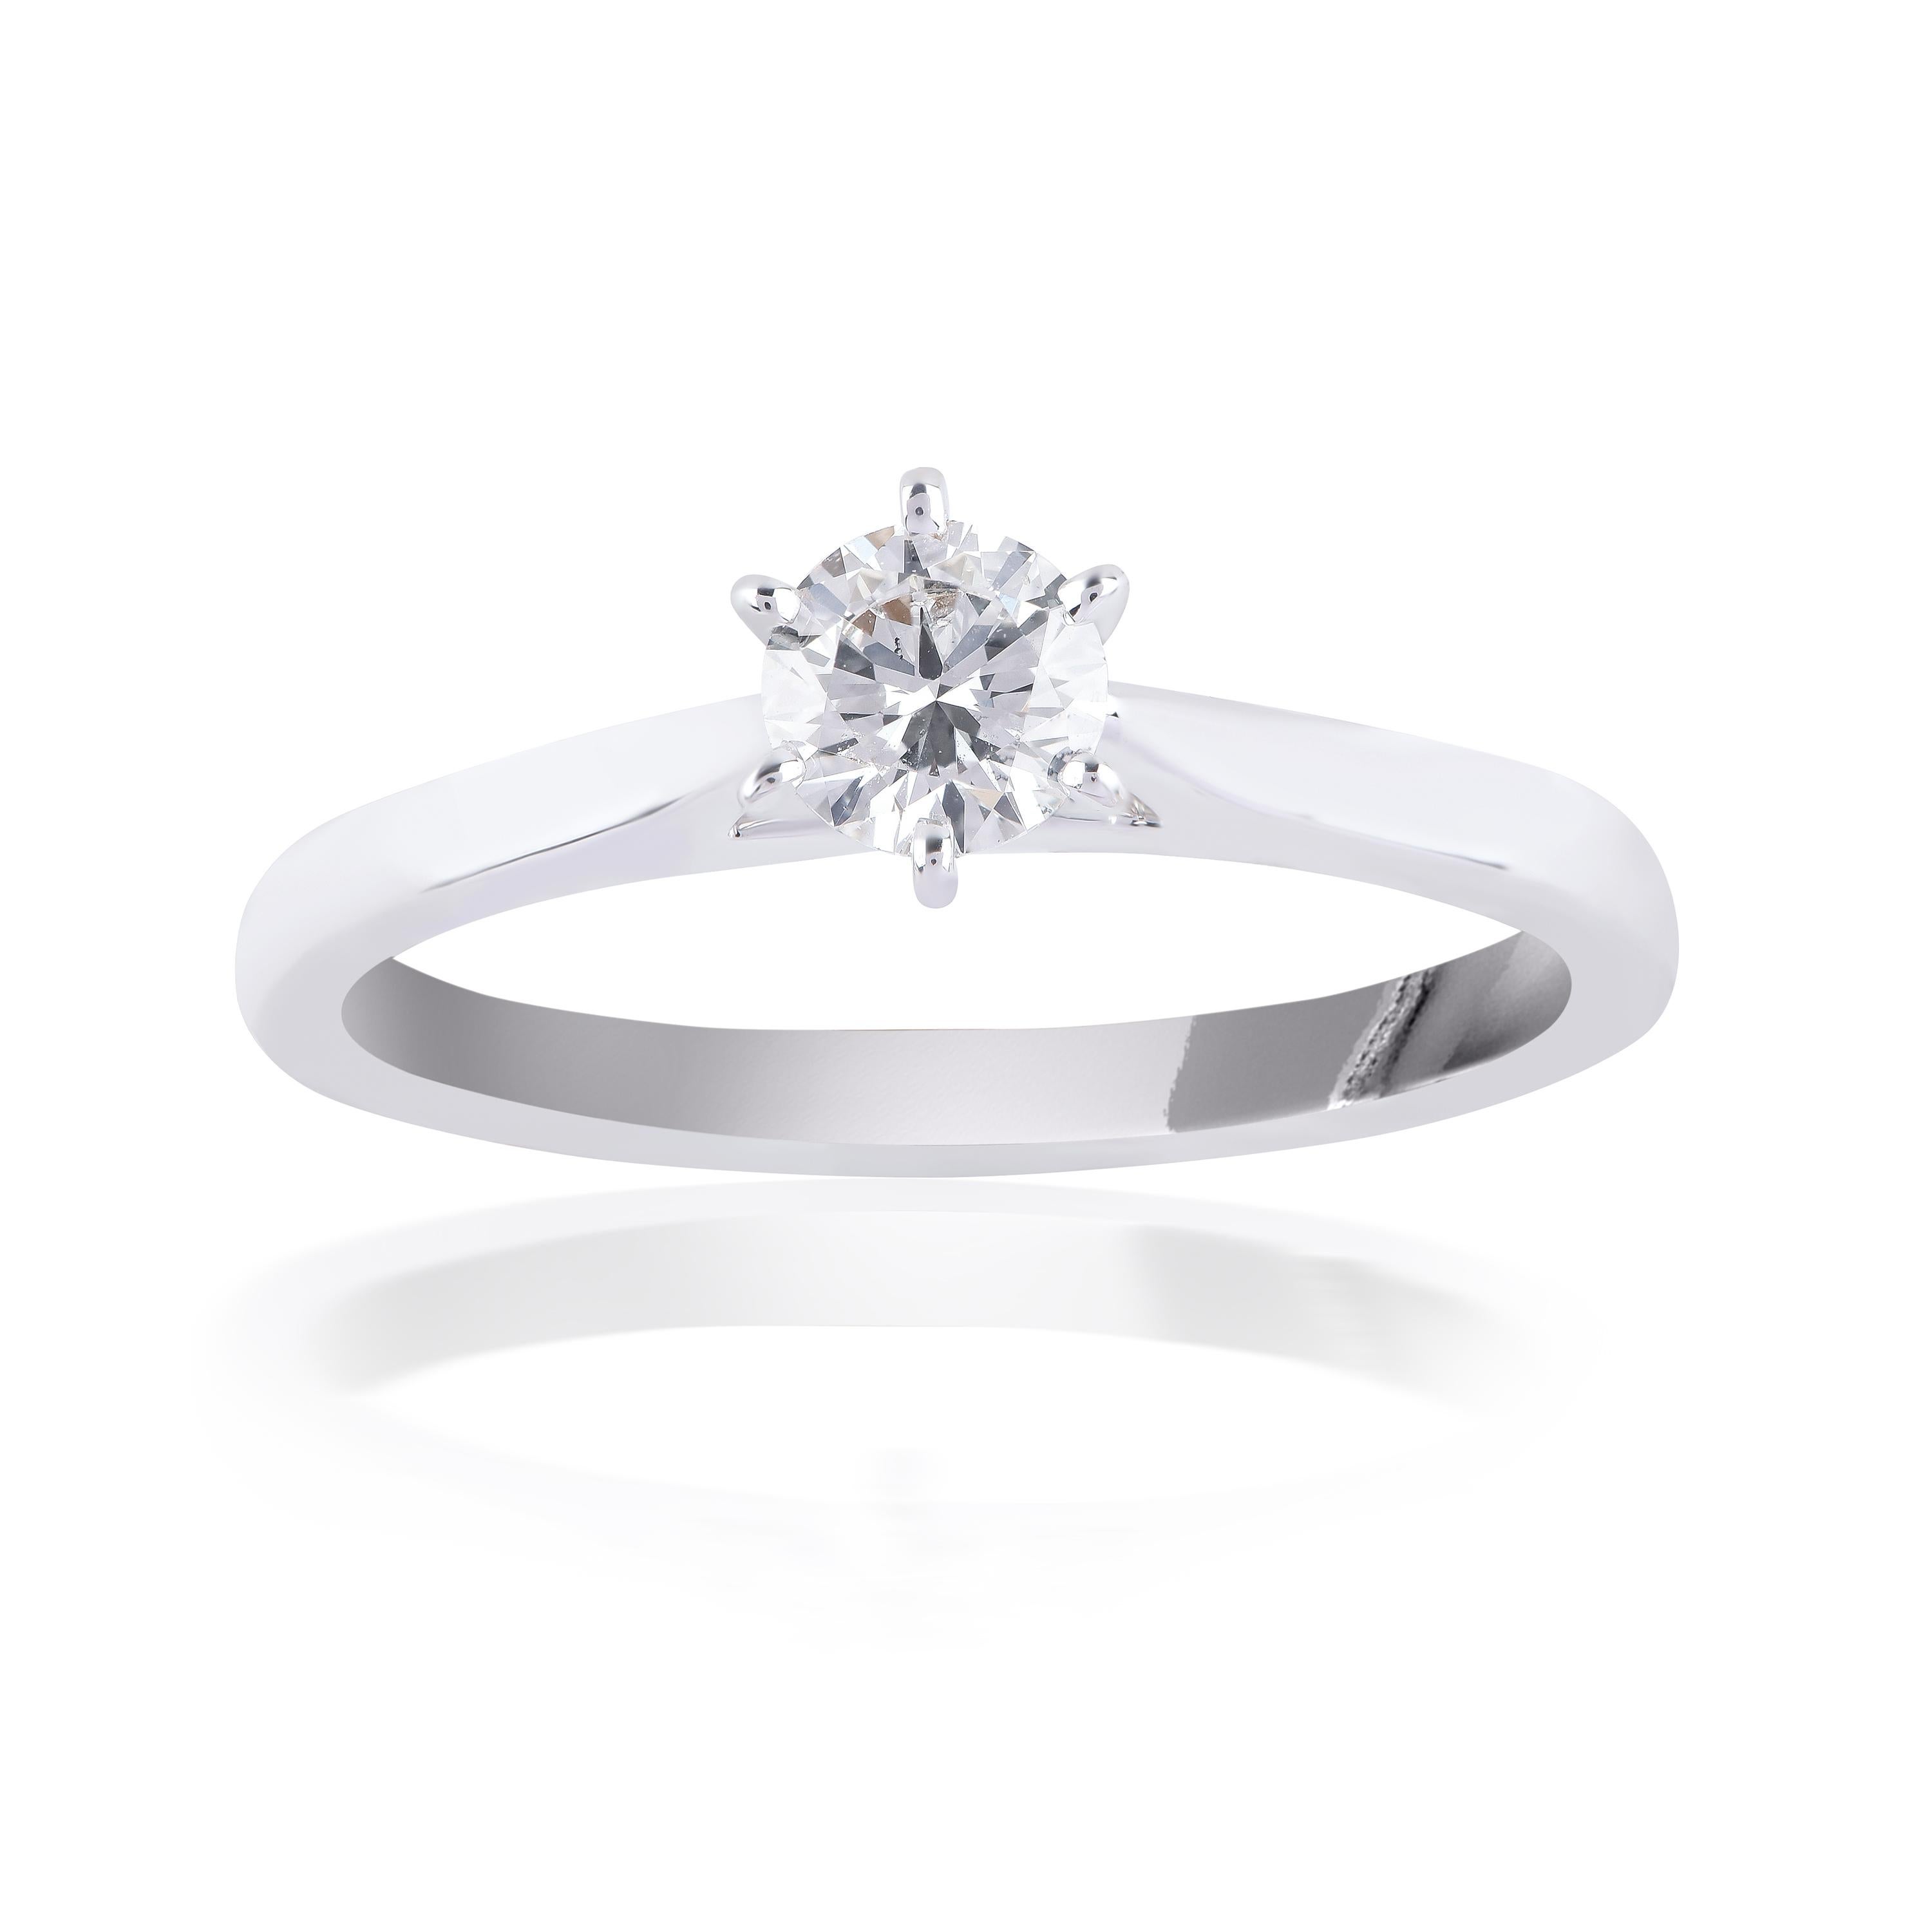 This classic solitaire ring is studded with 1 brilliant cut diamond and is designed in 18-karat white gold. The diamonds are graded G-H Color, VS Clarity.